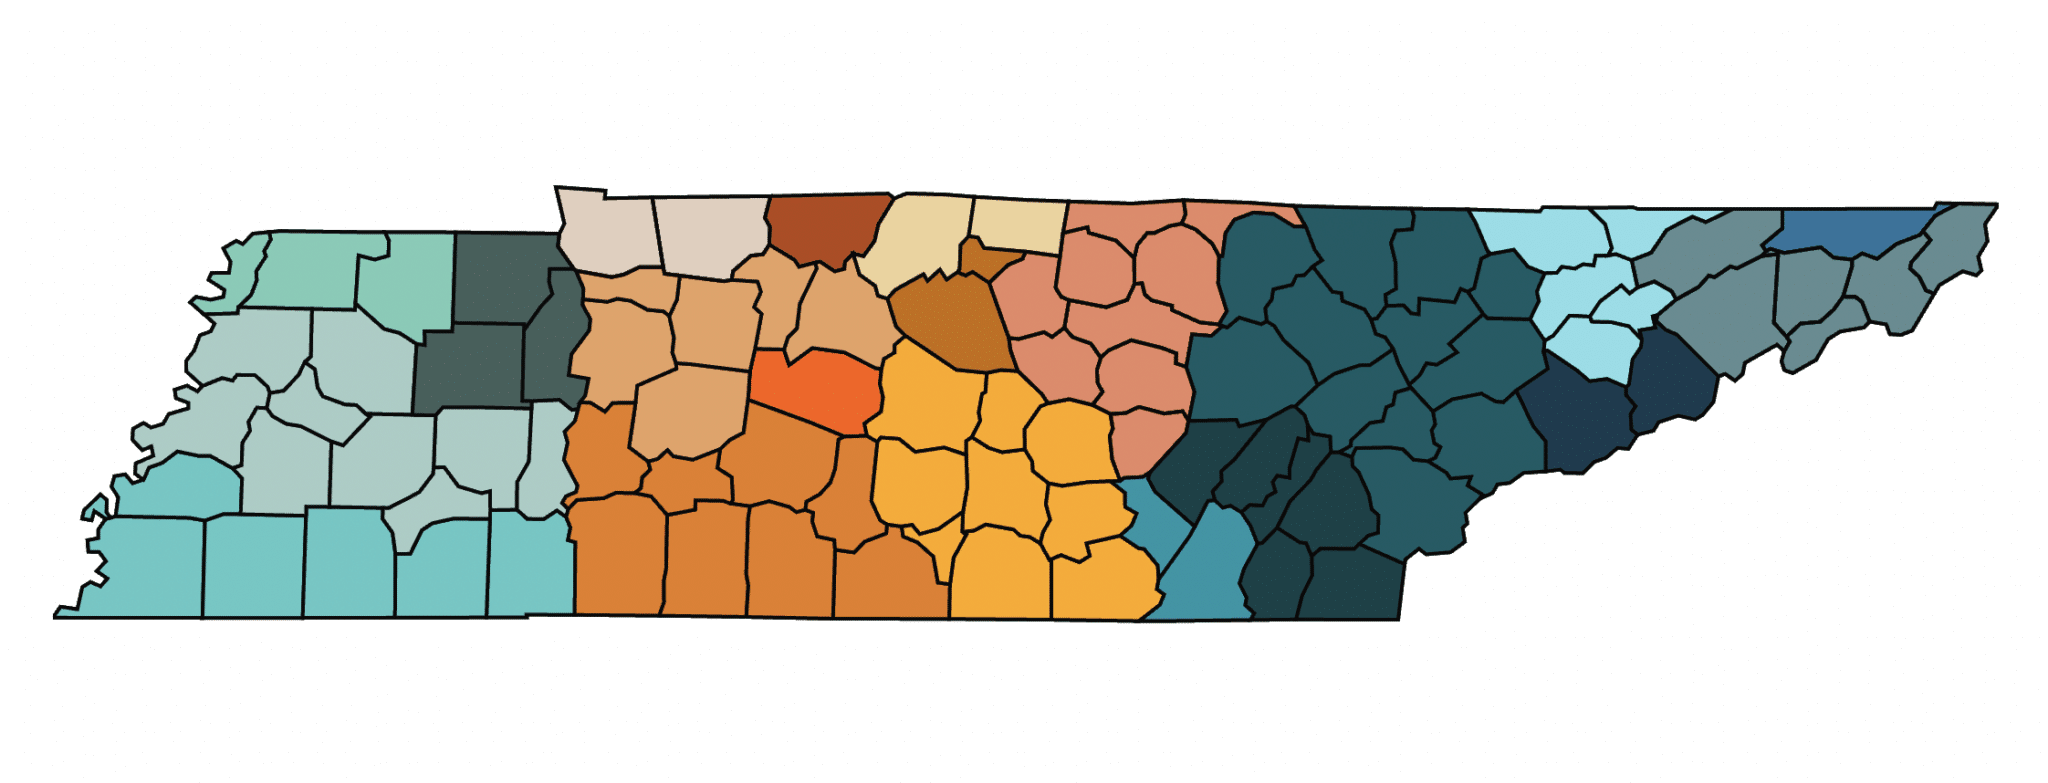 The state of Tennessee drawn and colored identifying the various regions of the state.